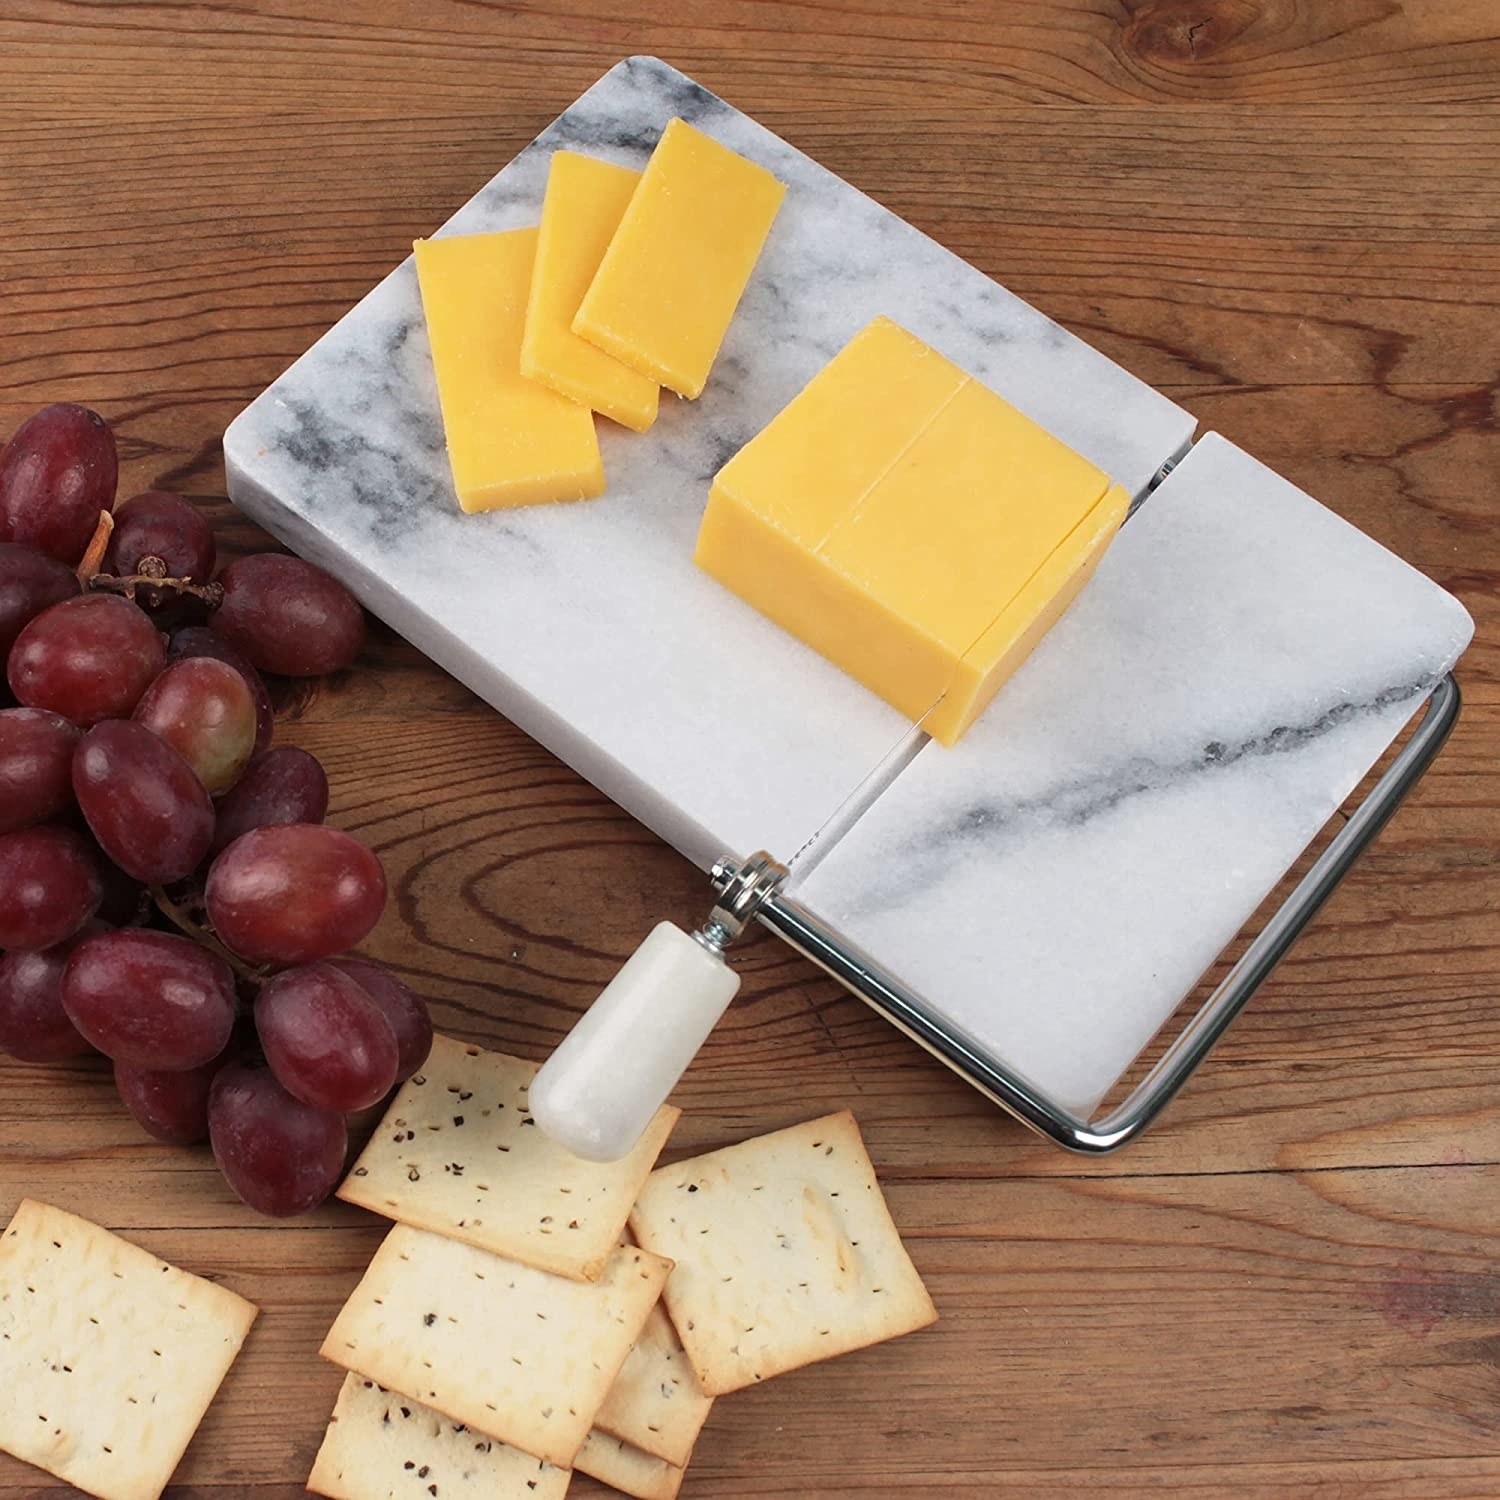 the marble cheese cutter cutting through a block of cheese